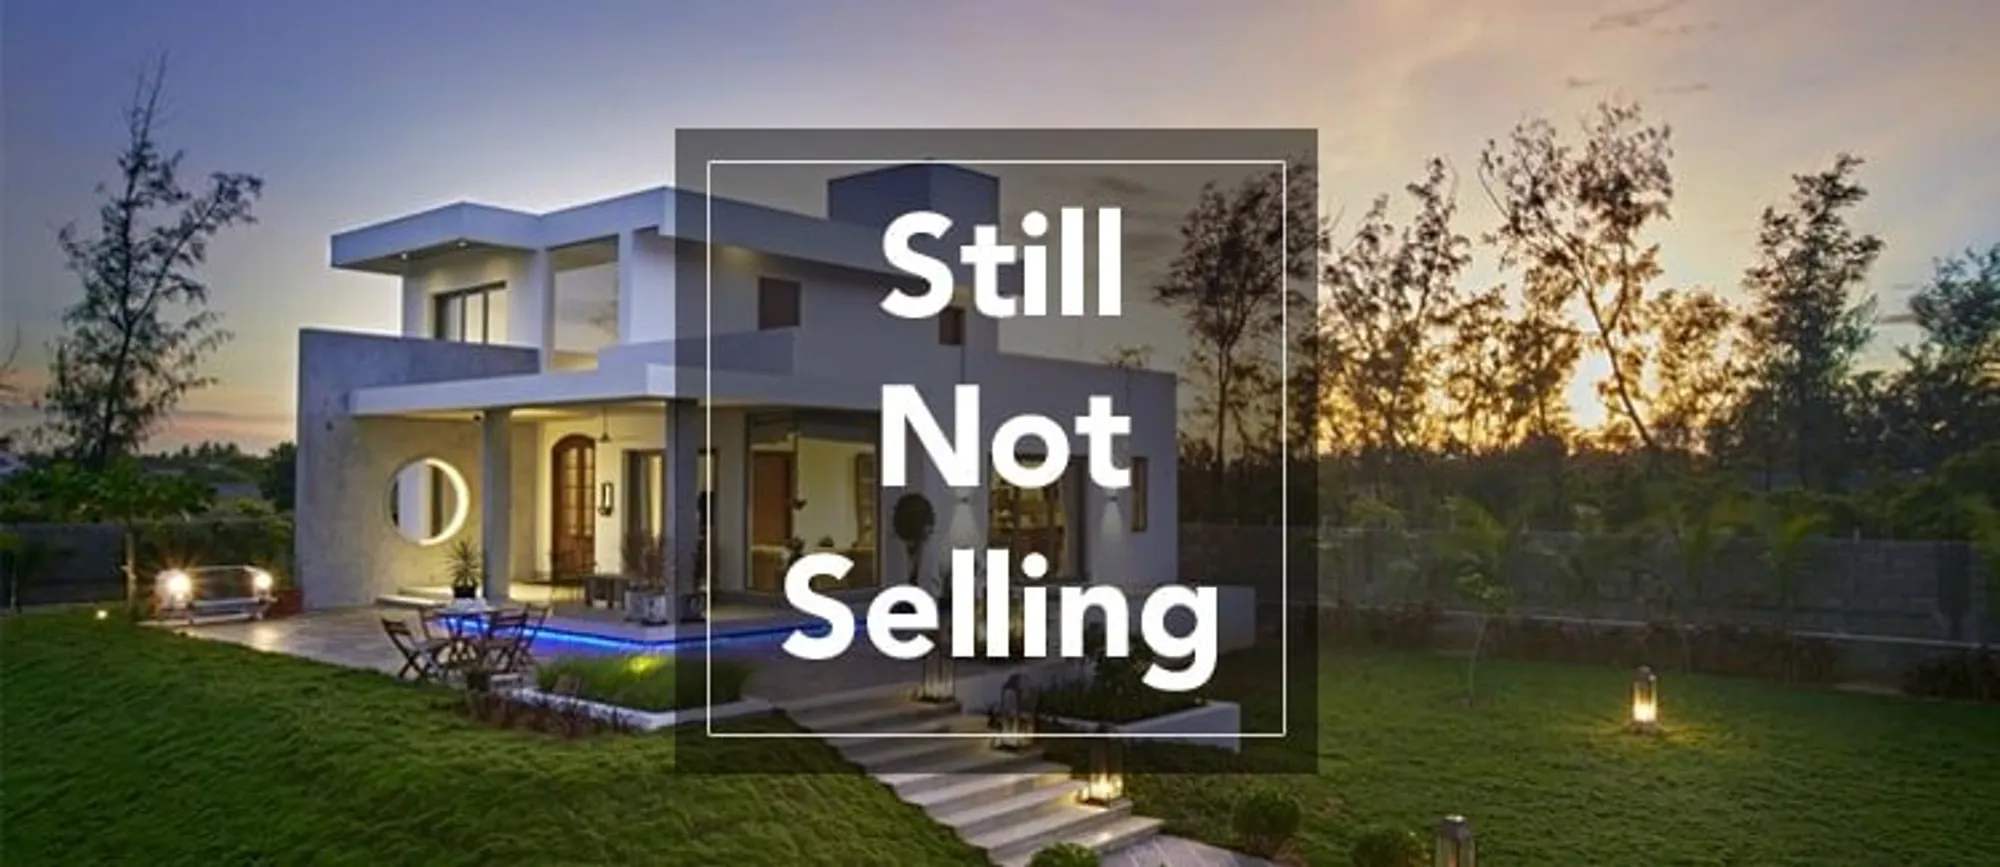 Things to do when your home is not selling